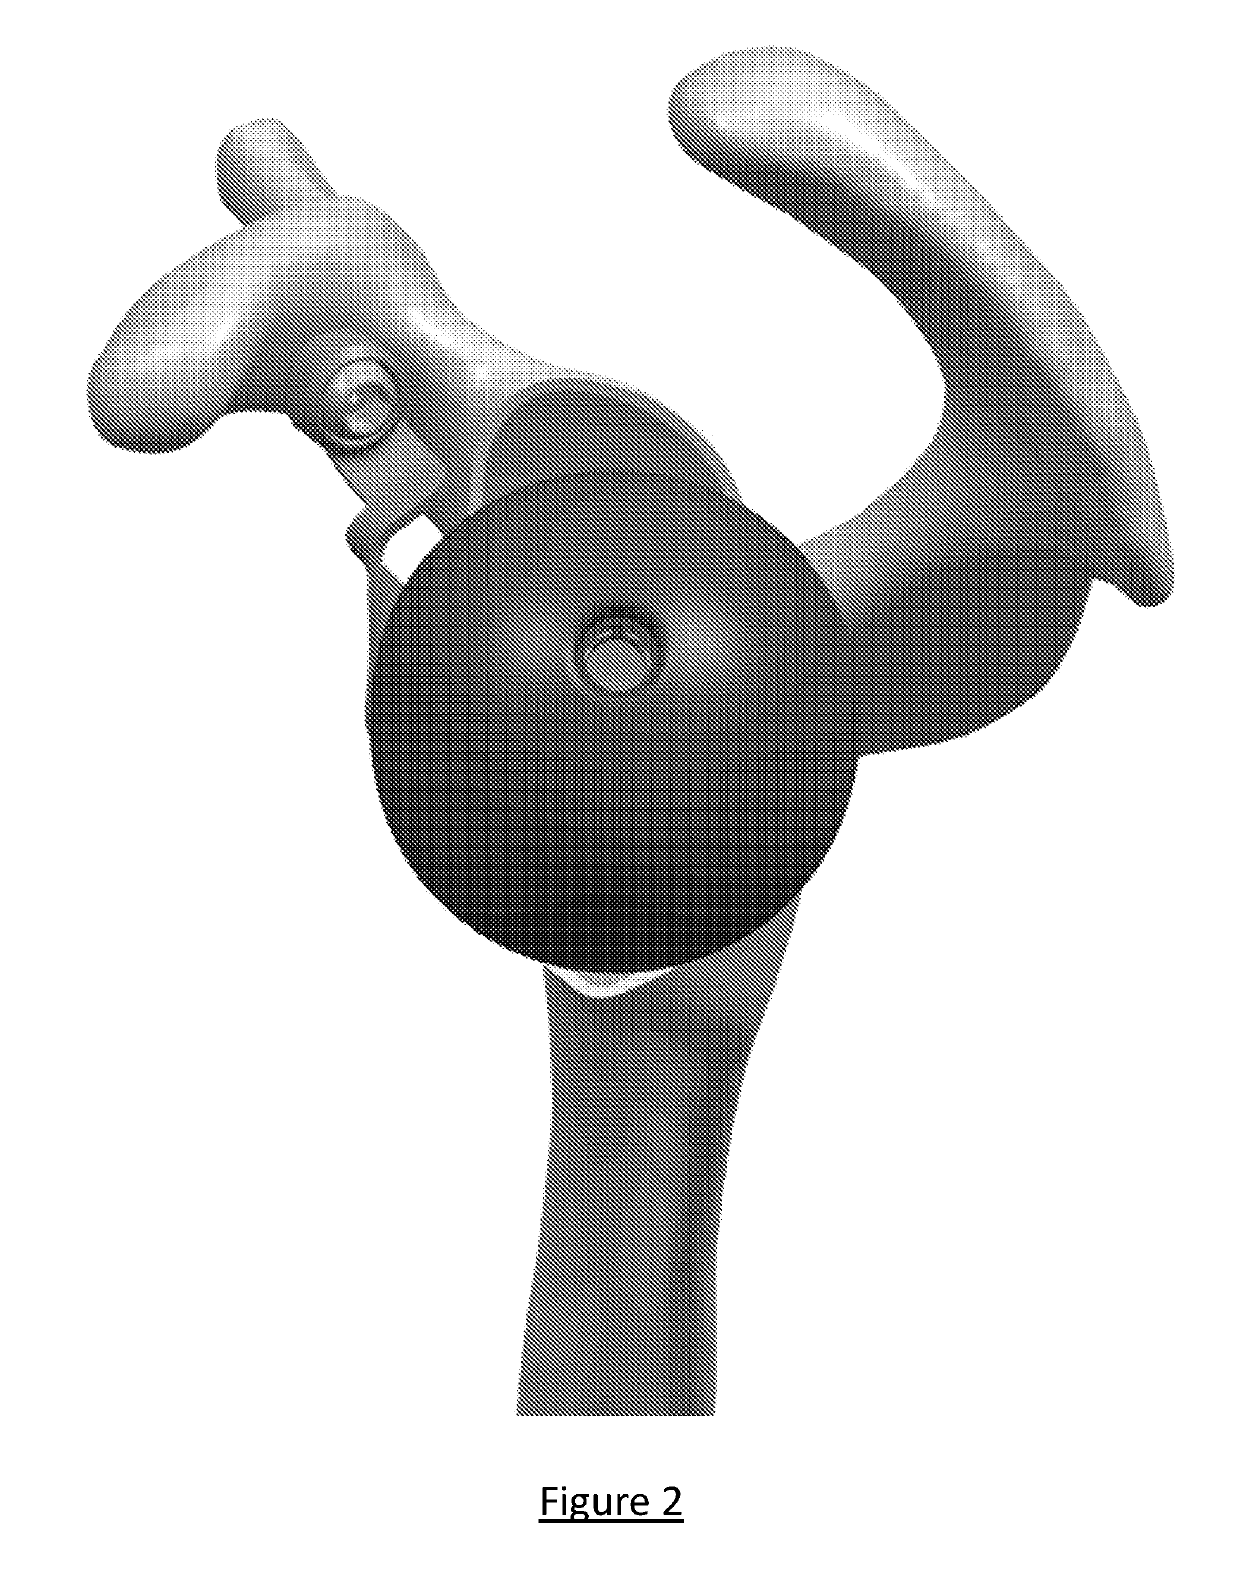 Platform rtsa glenoid prosthesis with modular attachments capable of improving initial fixation, fracture reconstructions, and joint biomechanics